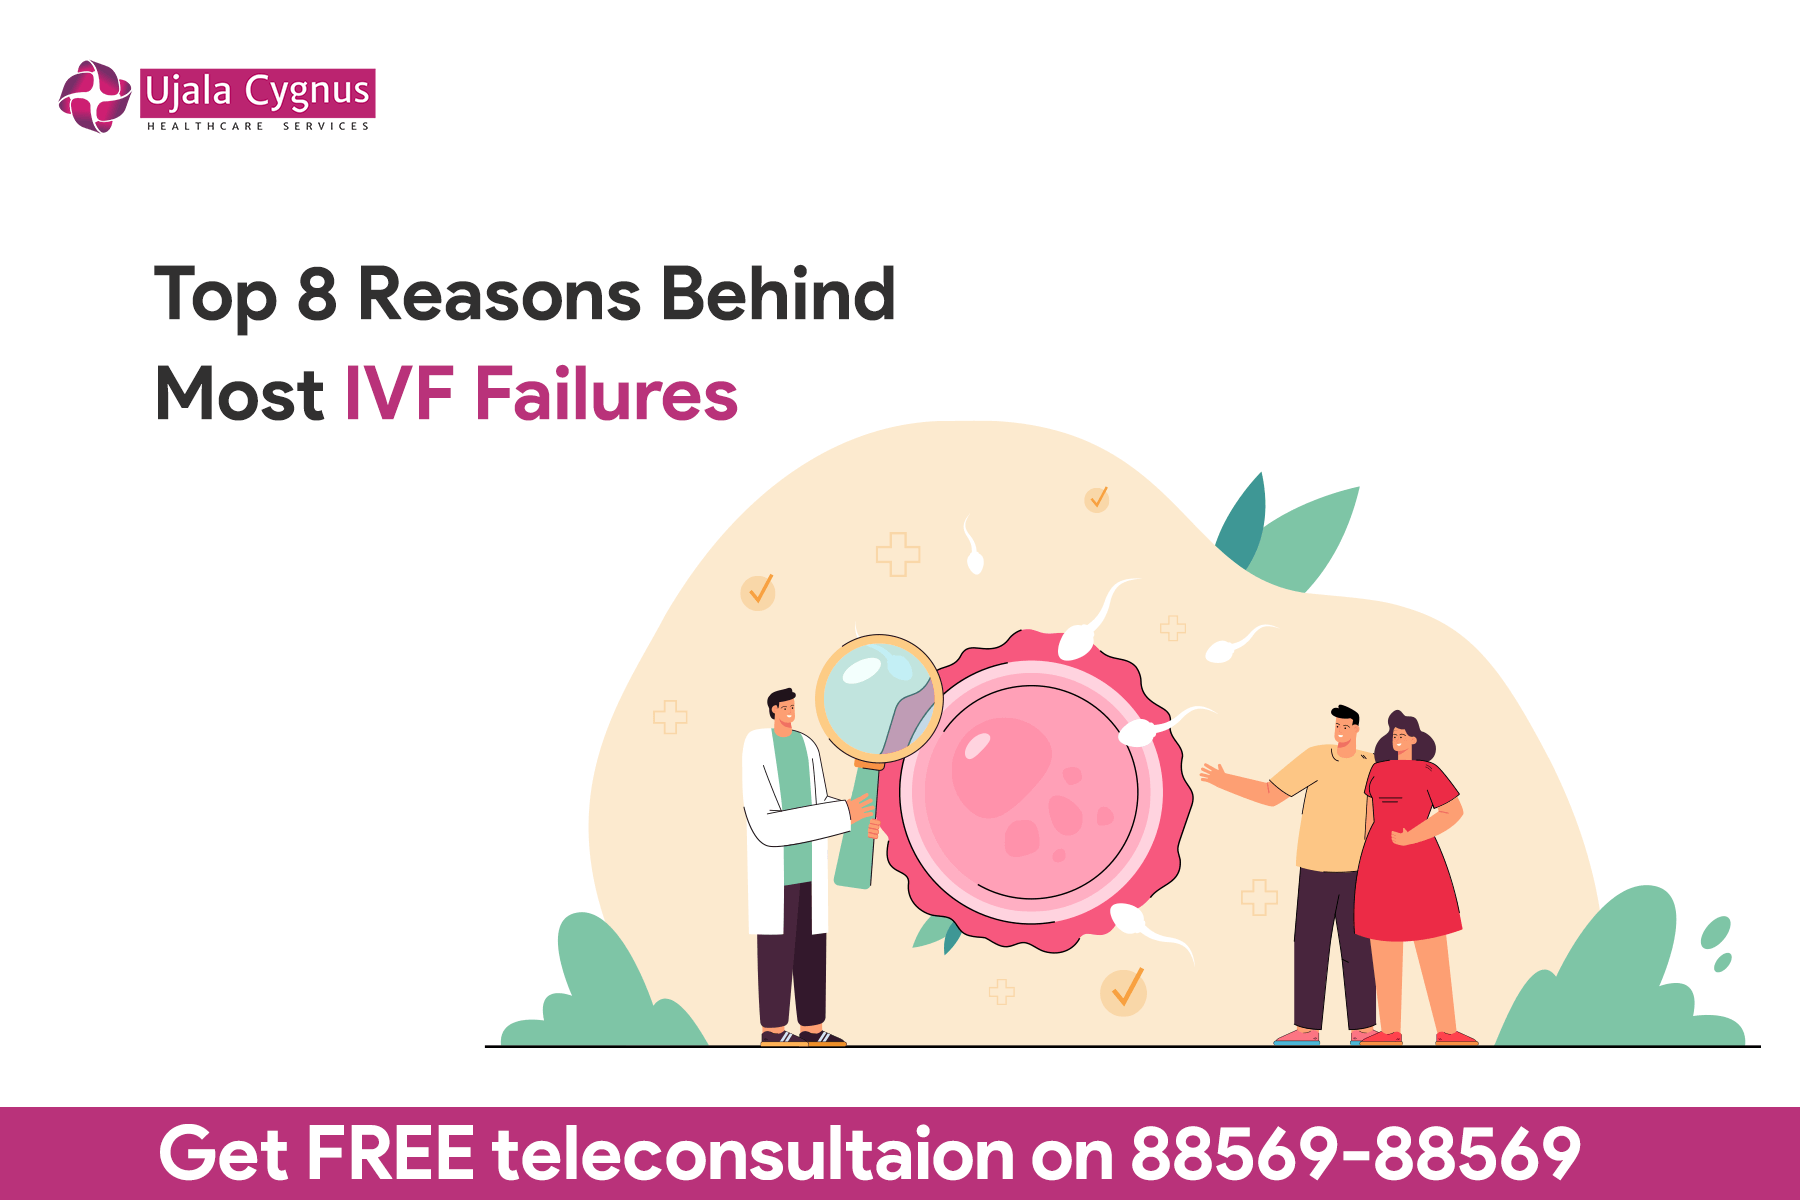 Top 8 Reasons Behind Most IVF Failures